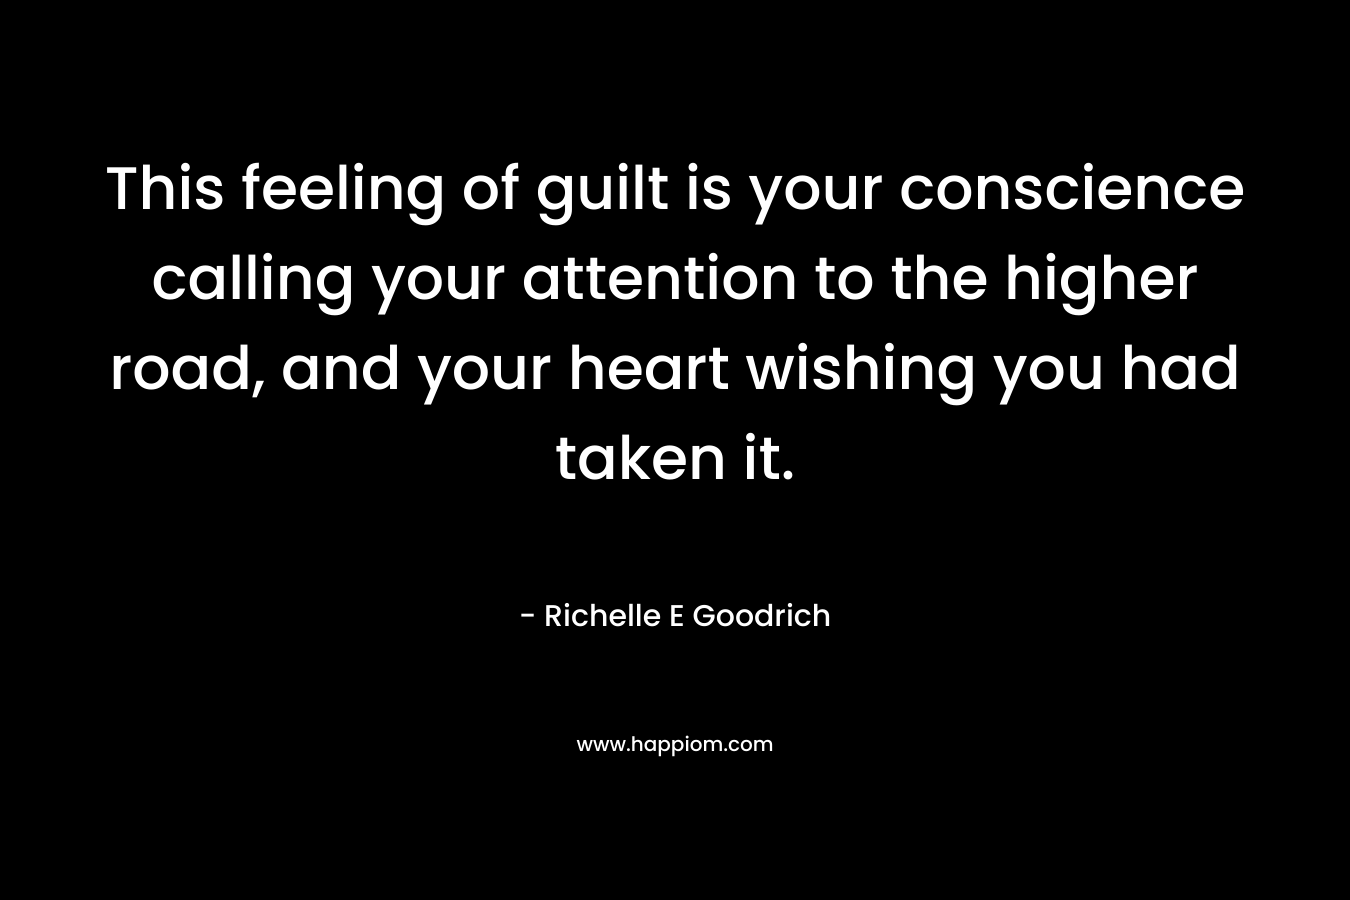 This feeling of guilt is your conscience calling your attention to the higher road, and your heart wishing you had taken it.